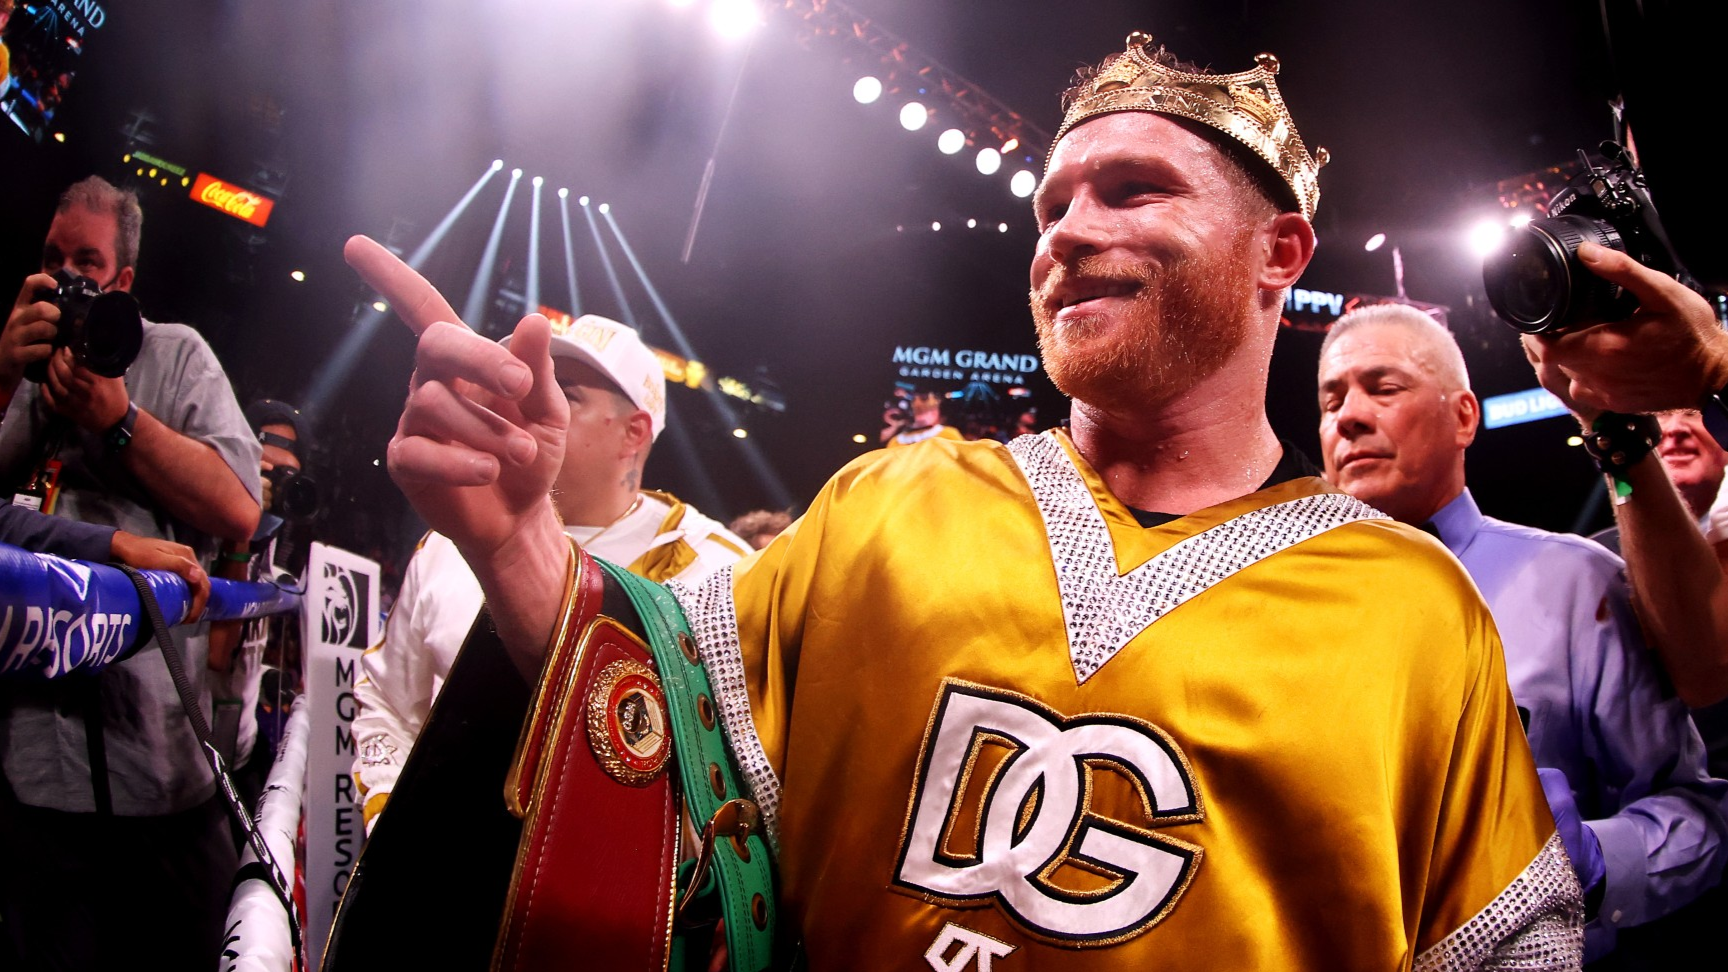 All hail the king: Canelo basks in historic achievement as first undisputed super middleweight champion